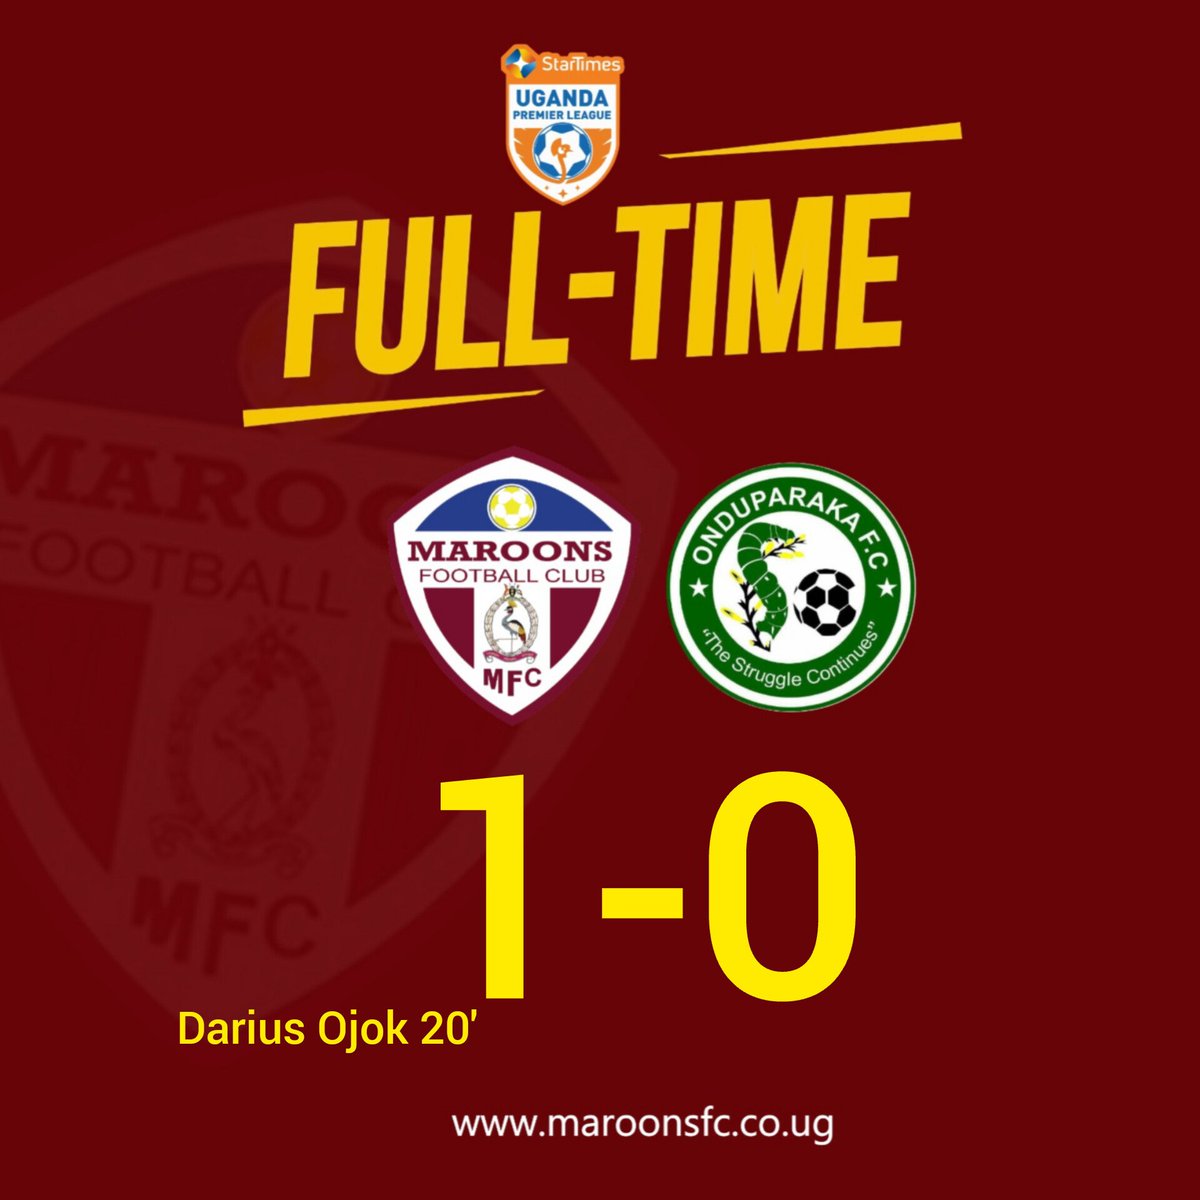 We climb fourth on the log after a 1-0 win over Onduparaka FC in Luzira.

The lonely strike was courtesy of Darius Ojok who scored his fifth goal of the season in less than 12 matches.

#OnlyMaroons #OneForce maroonsfc.co.ug #StarTimesUPL